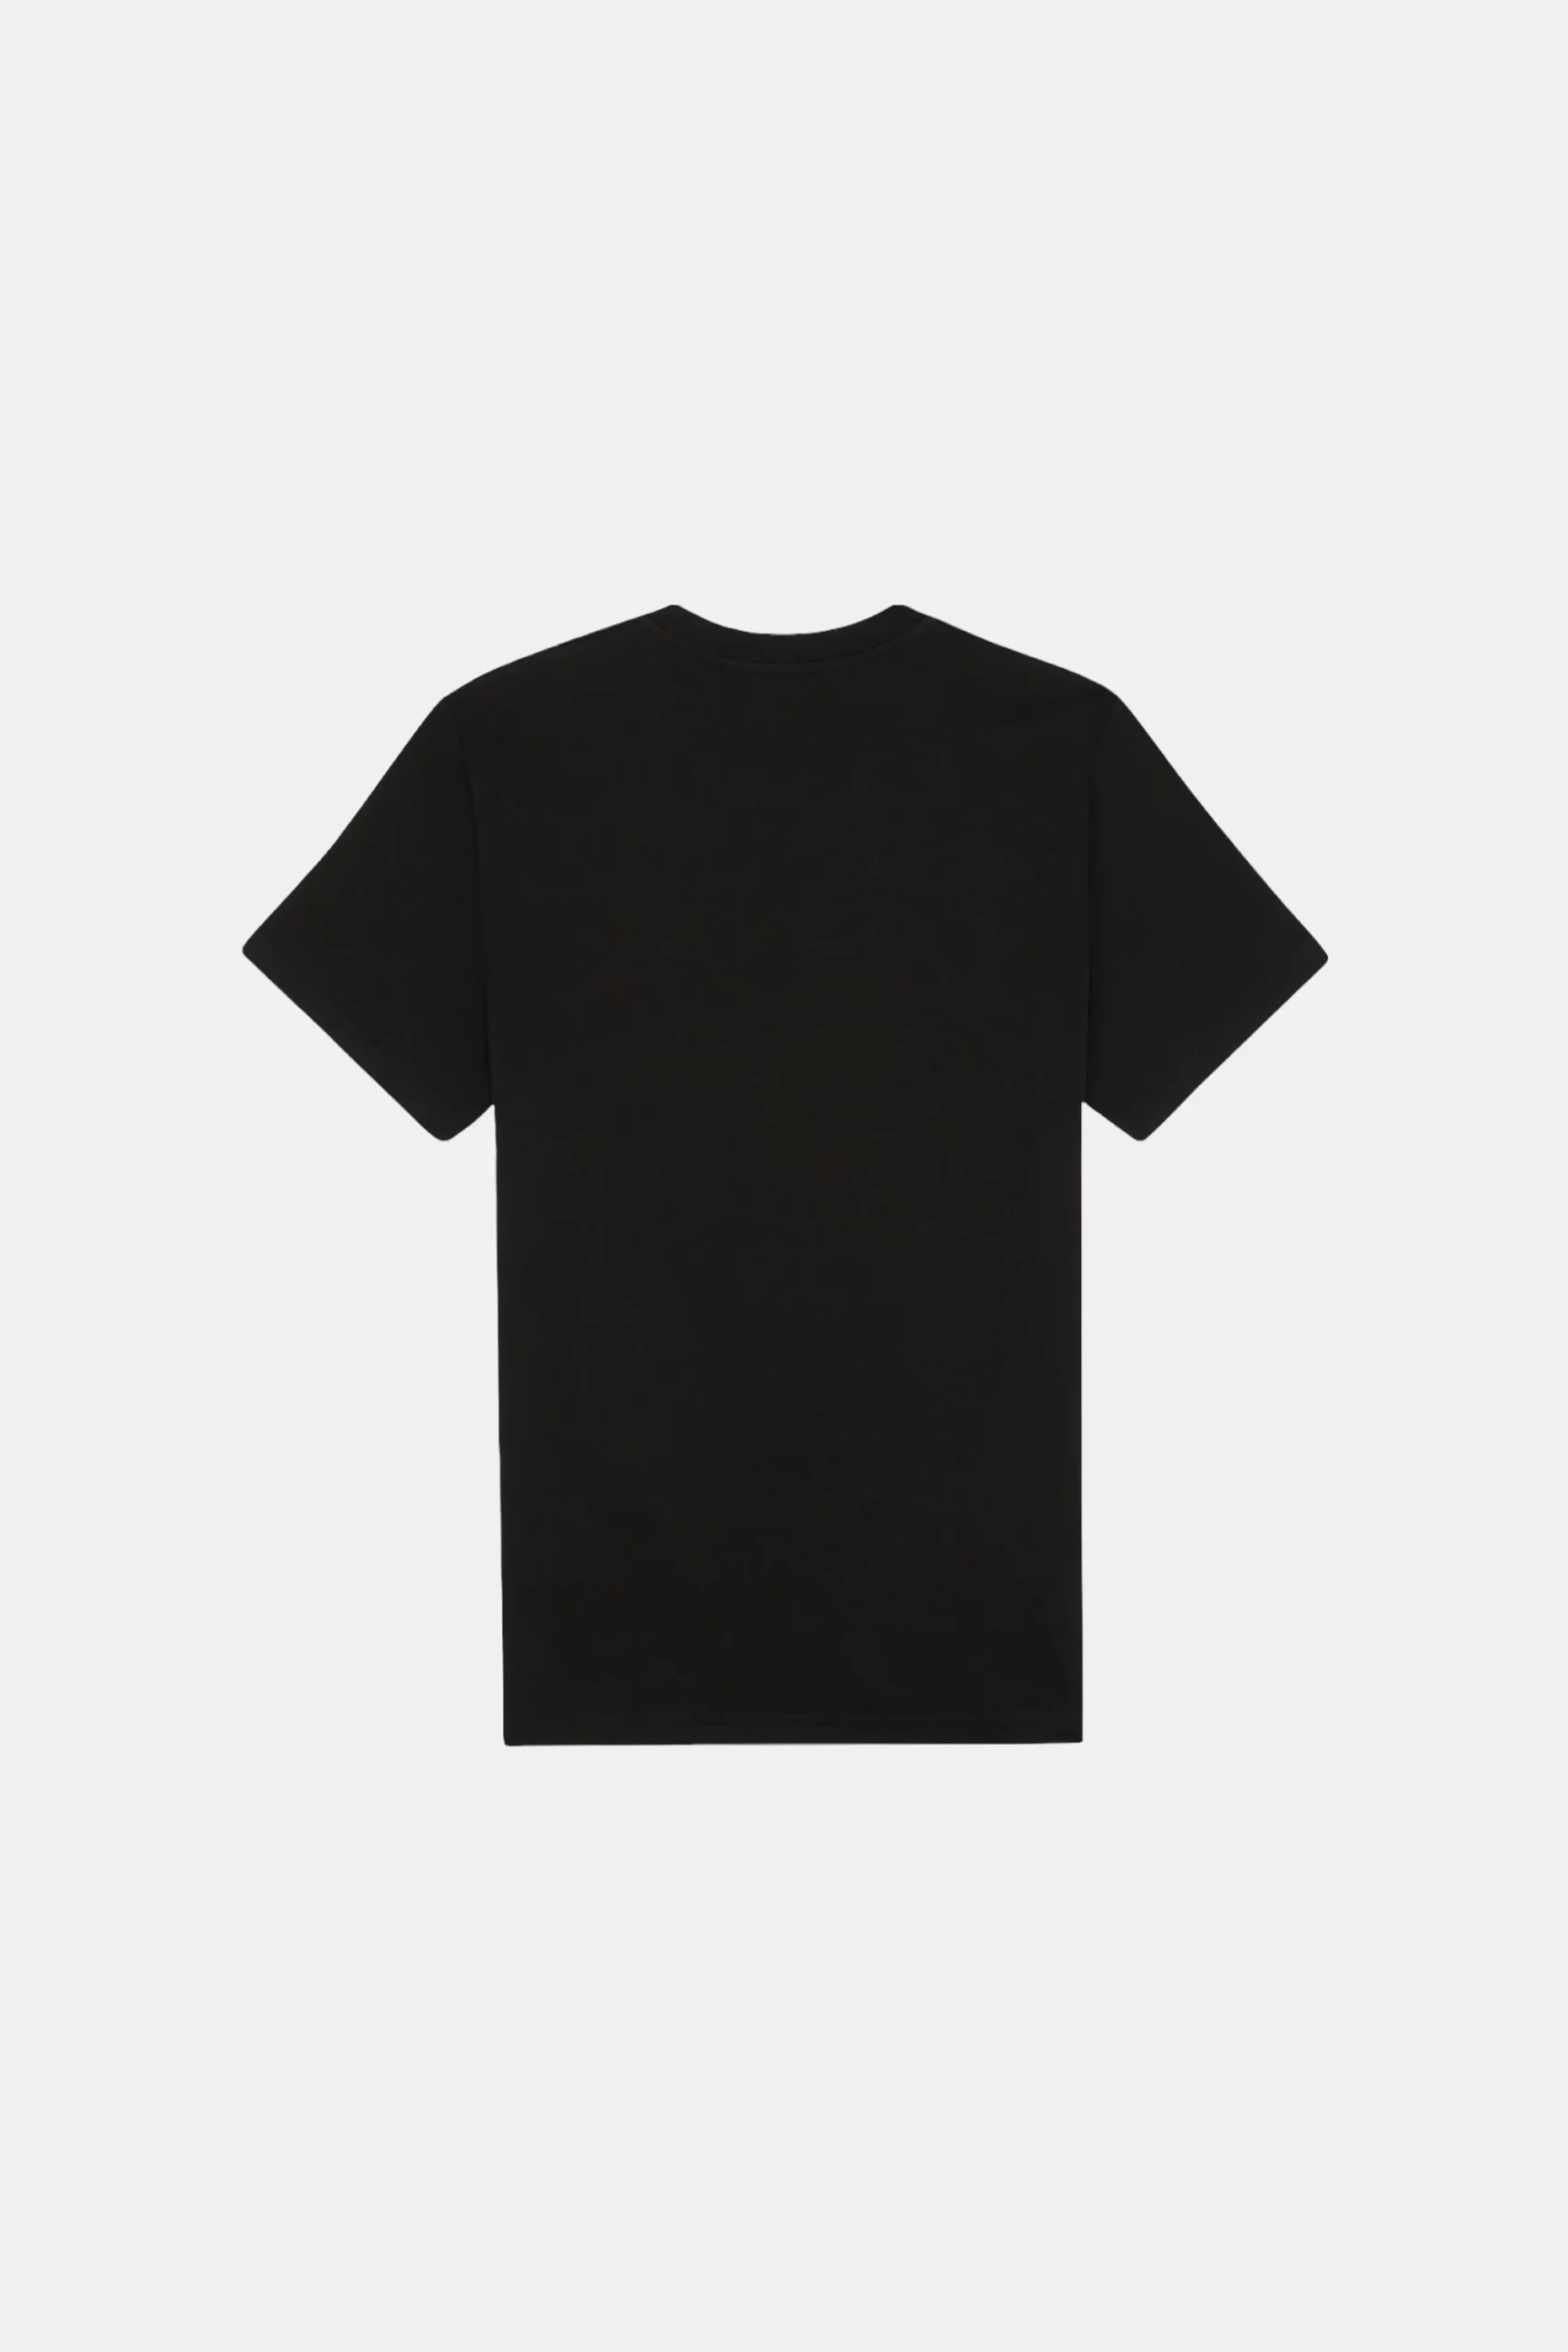 futbolka fred perry embroidered black 2